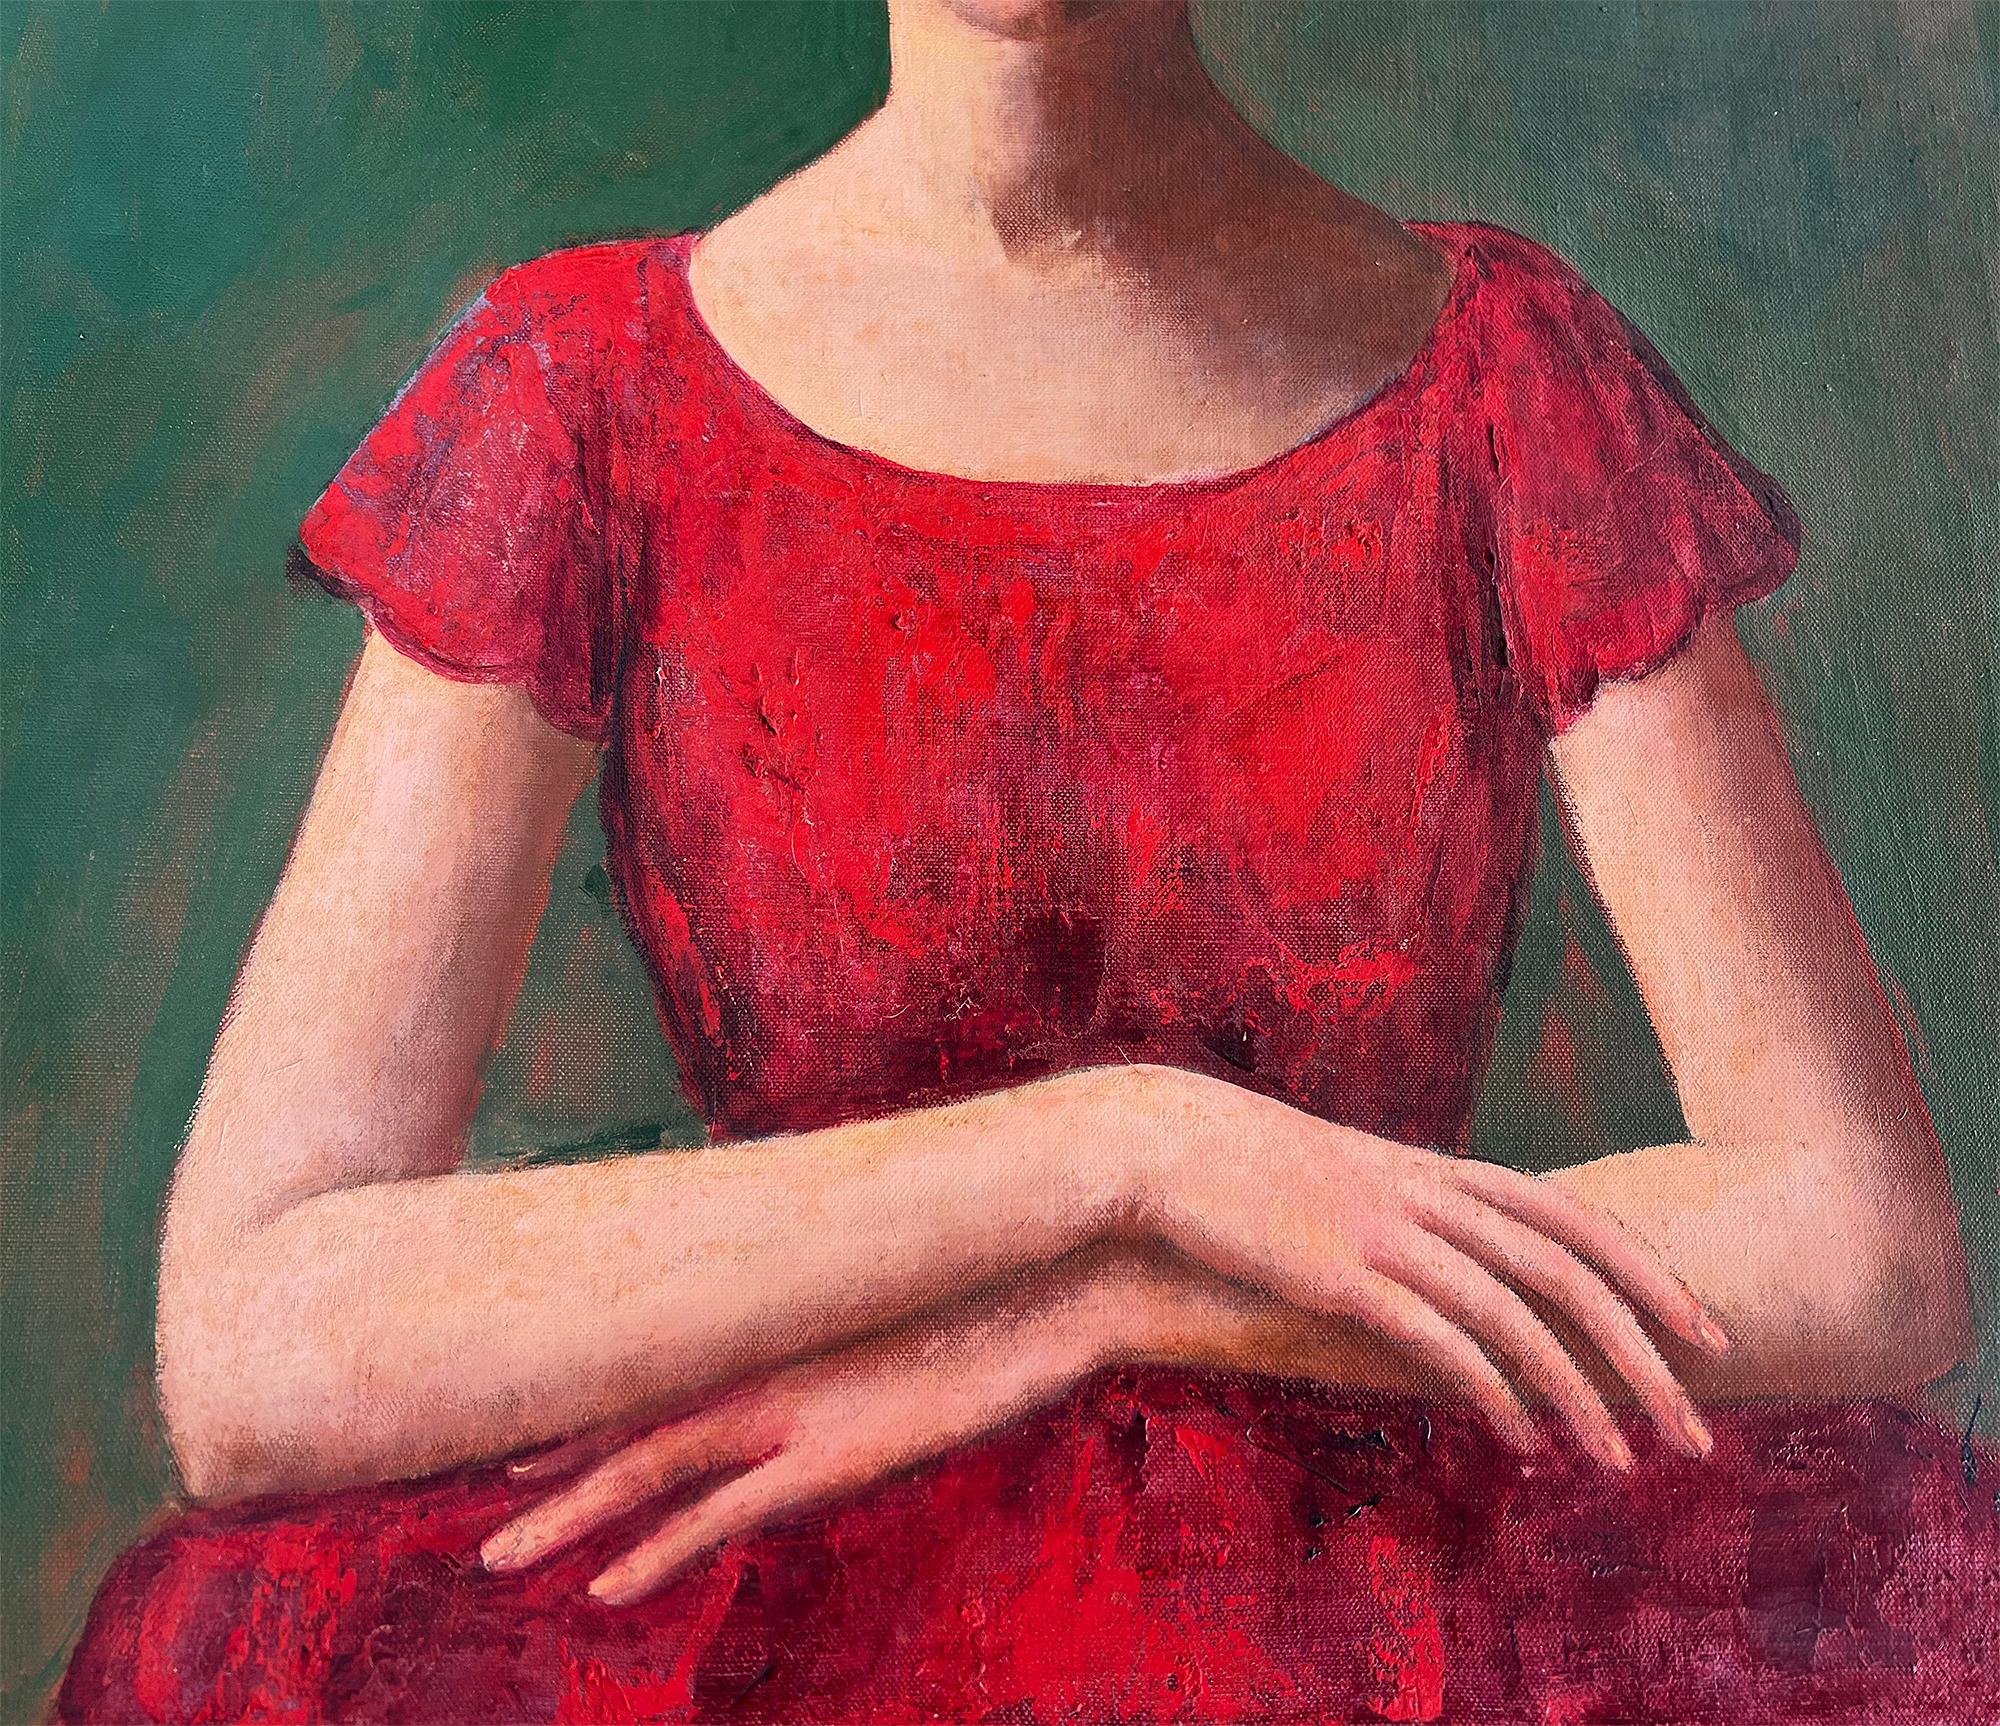 Woman in a Red Dress, Mid Century Female Illustrator/ Artist, Elizabeth Taylor ? - Painting by Gladys Rockmore Davis